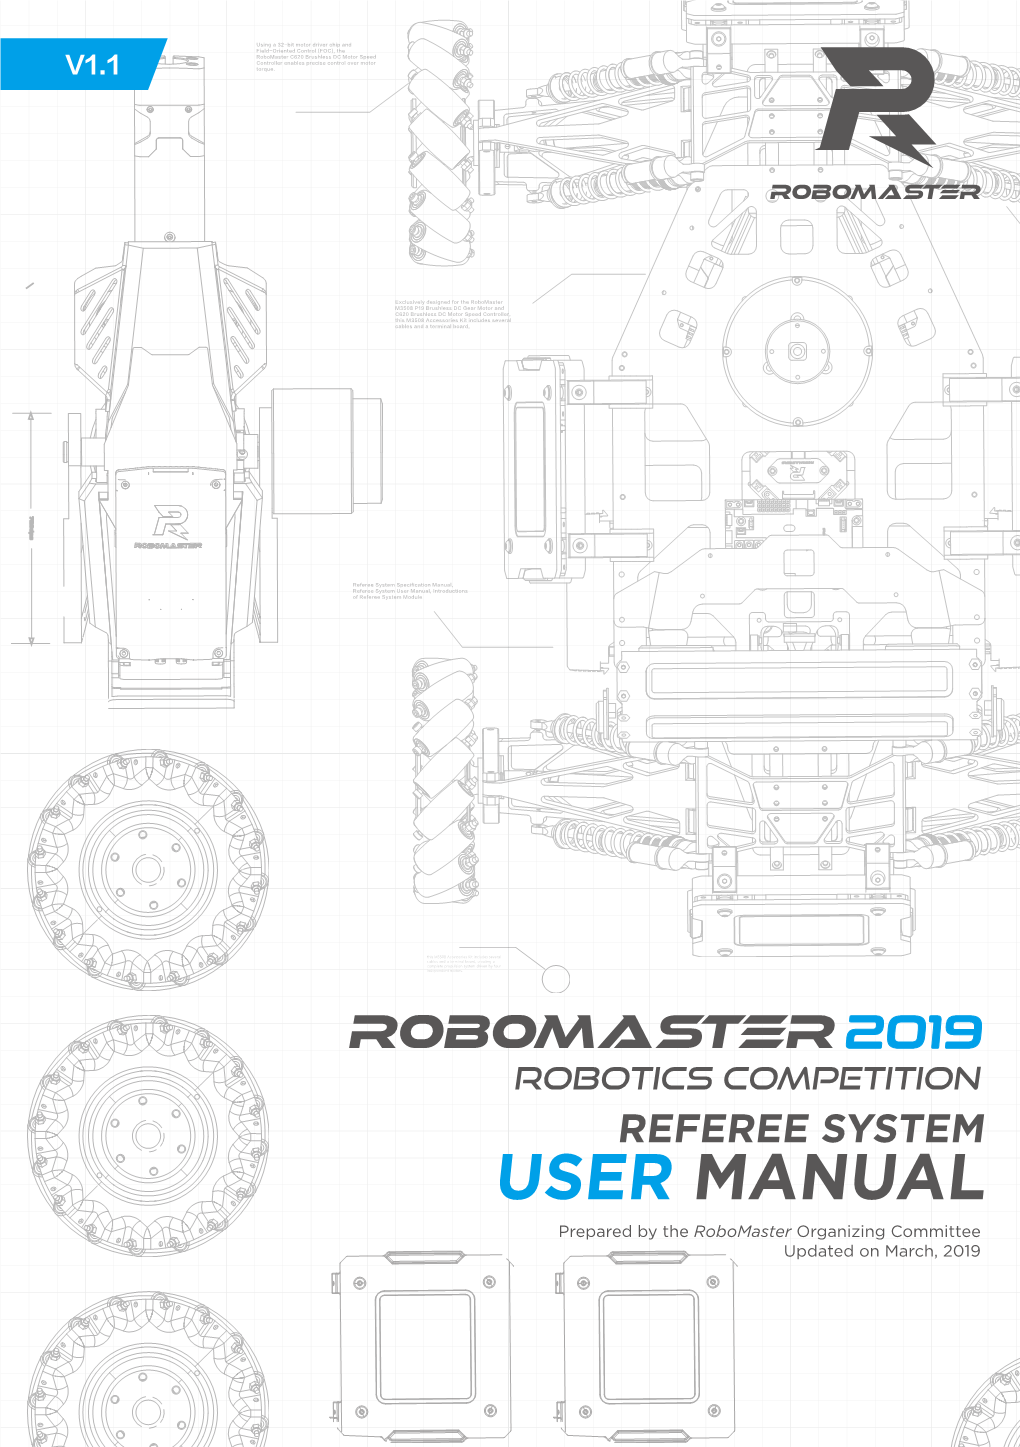 REFEREE SYSTEM USER MANUAL Prepared by the Robomaster Organizing Committee Updated on March, 2019